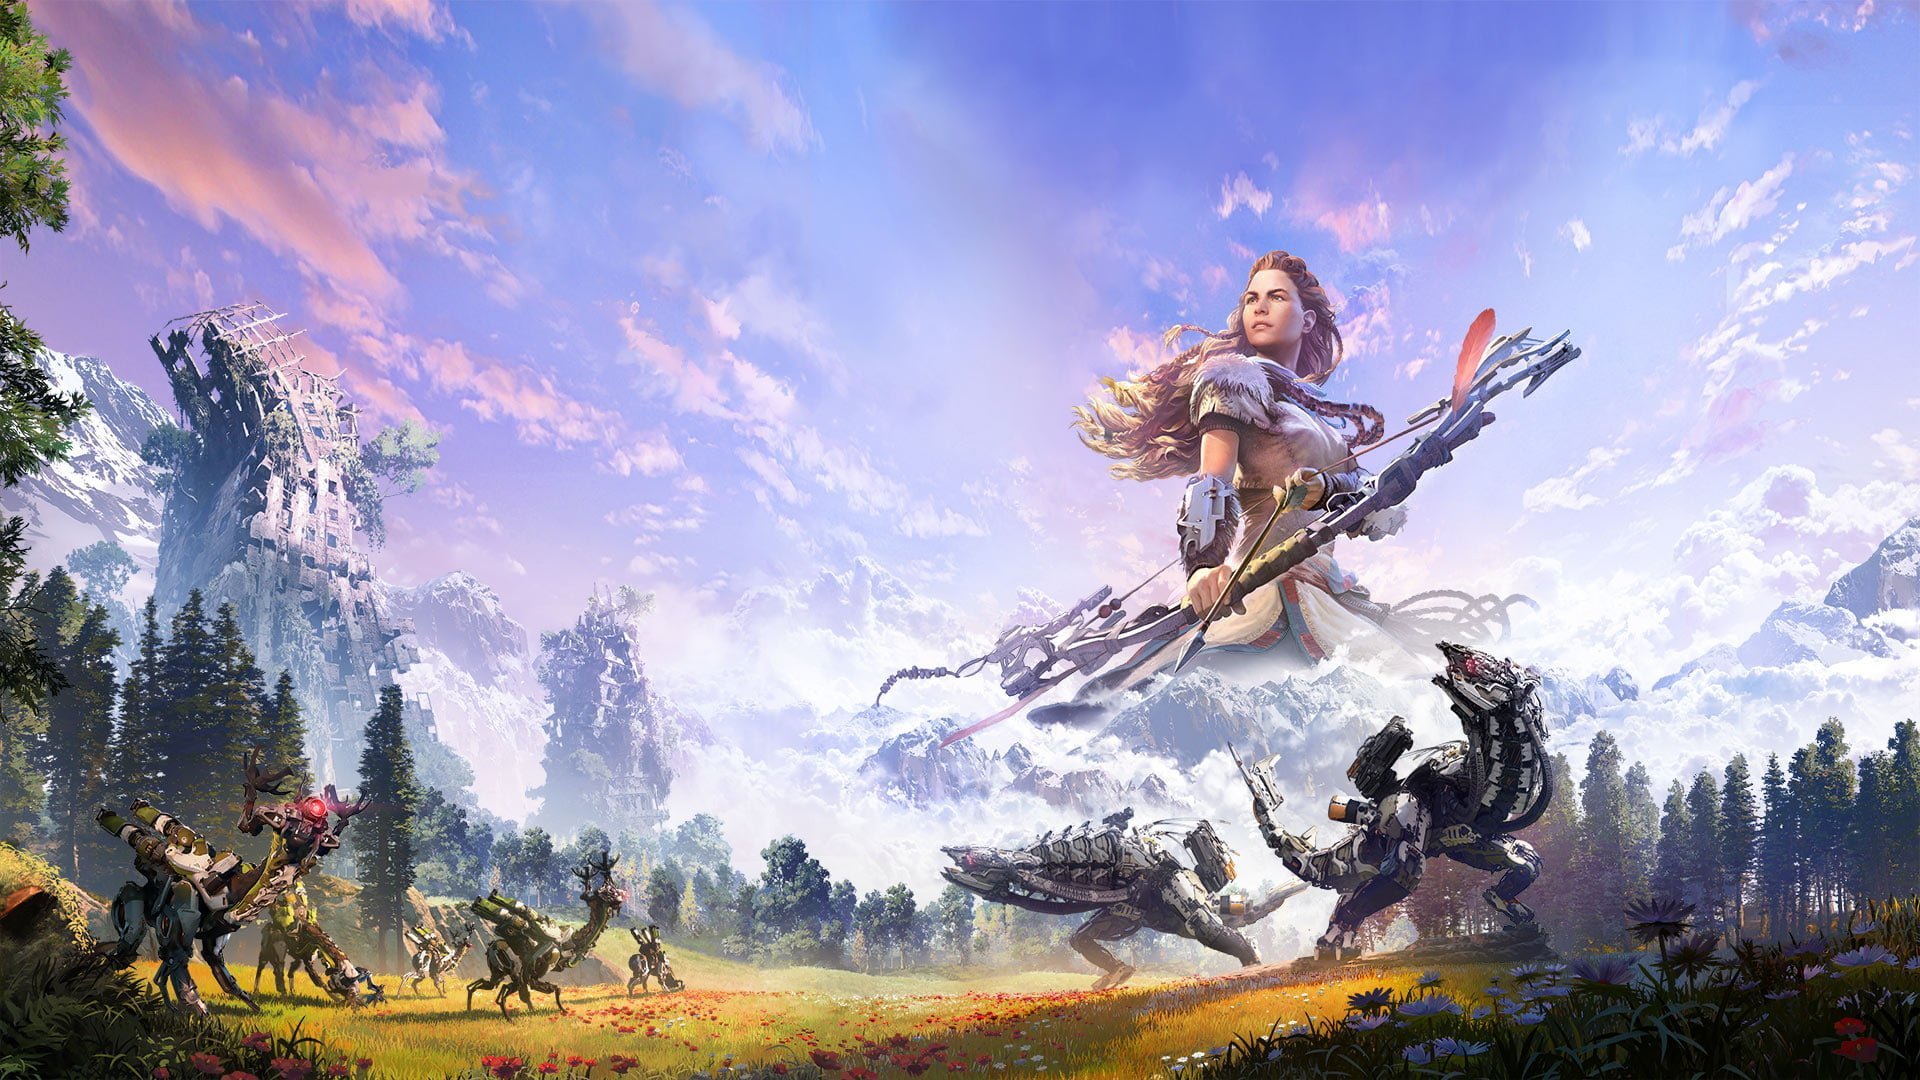 Horizon Zero Dawn Rockets Straight to the Top of Steam BestSellers